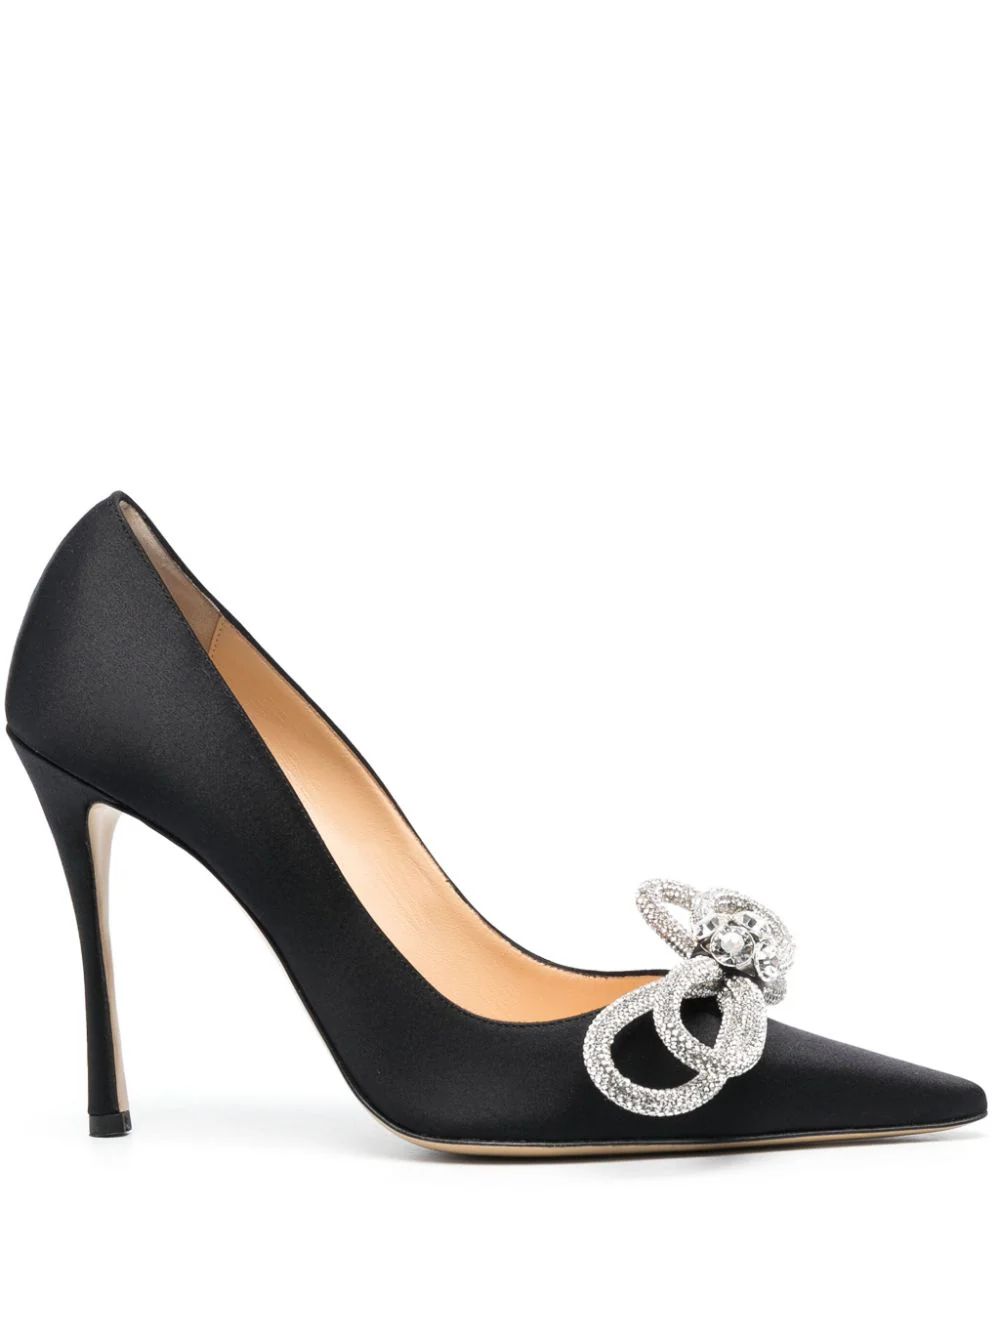 Double Bow 95mm satin pumps | Farfetch Global